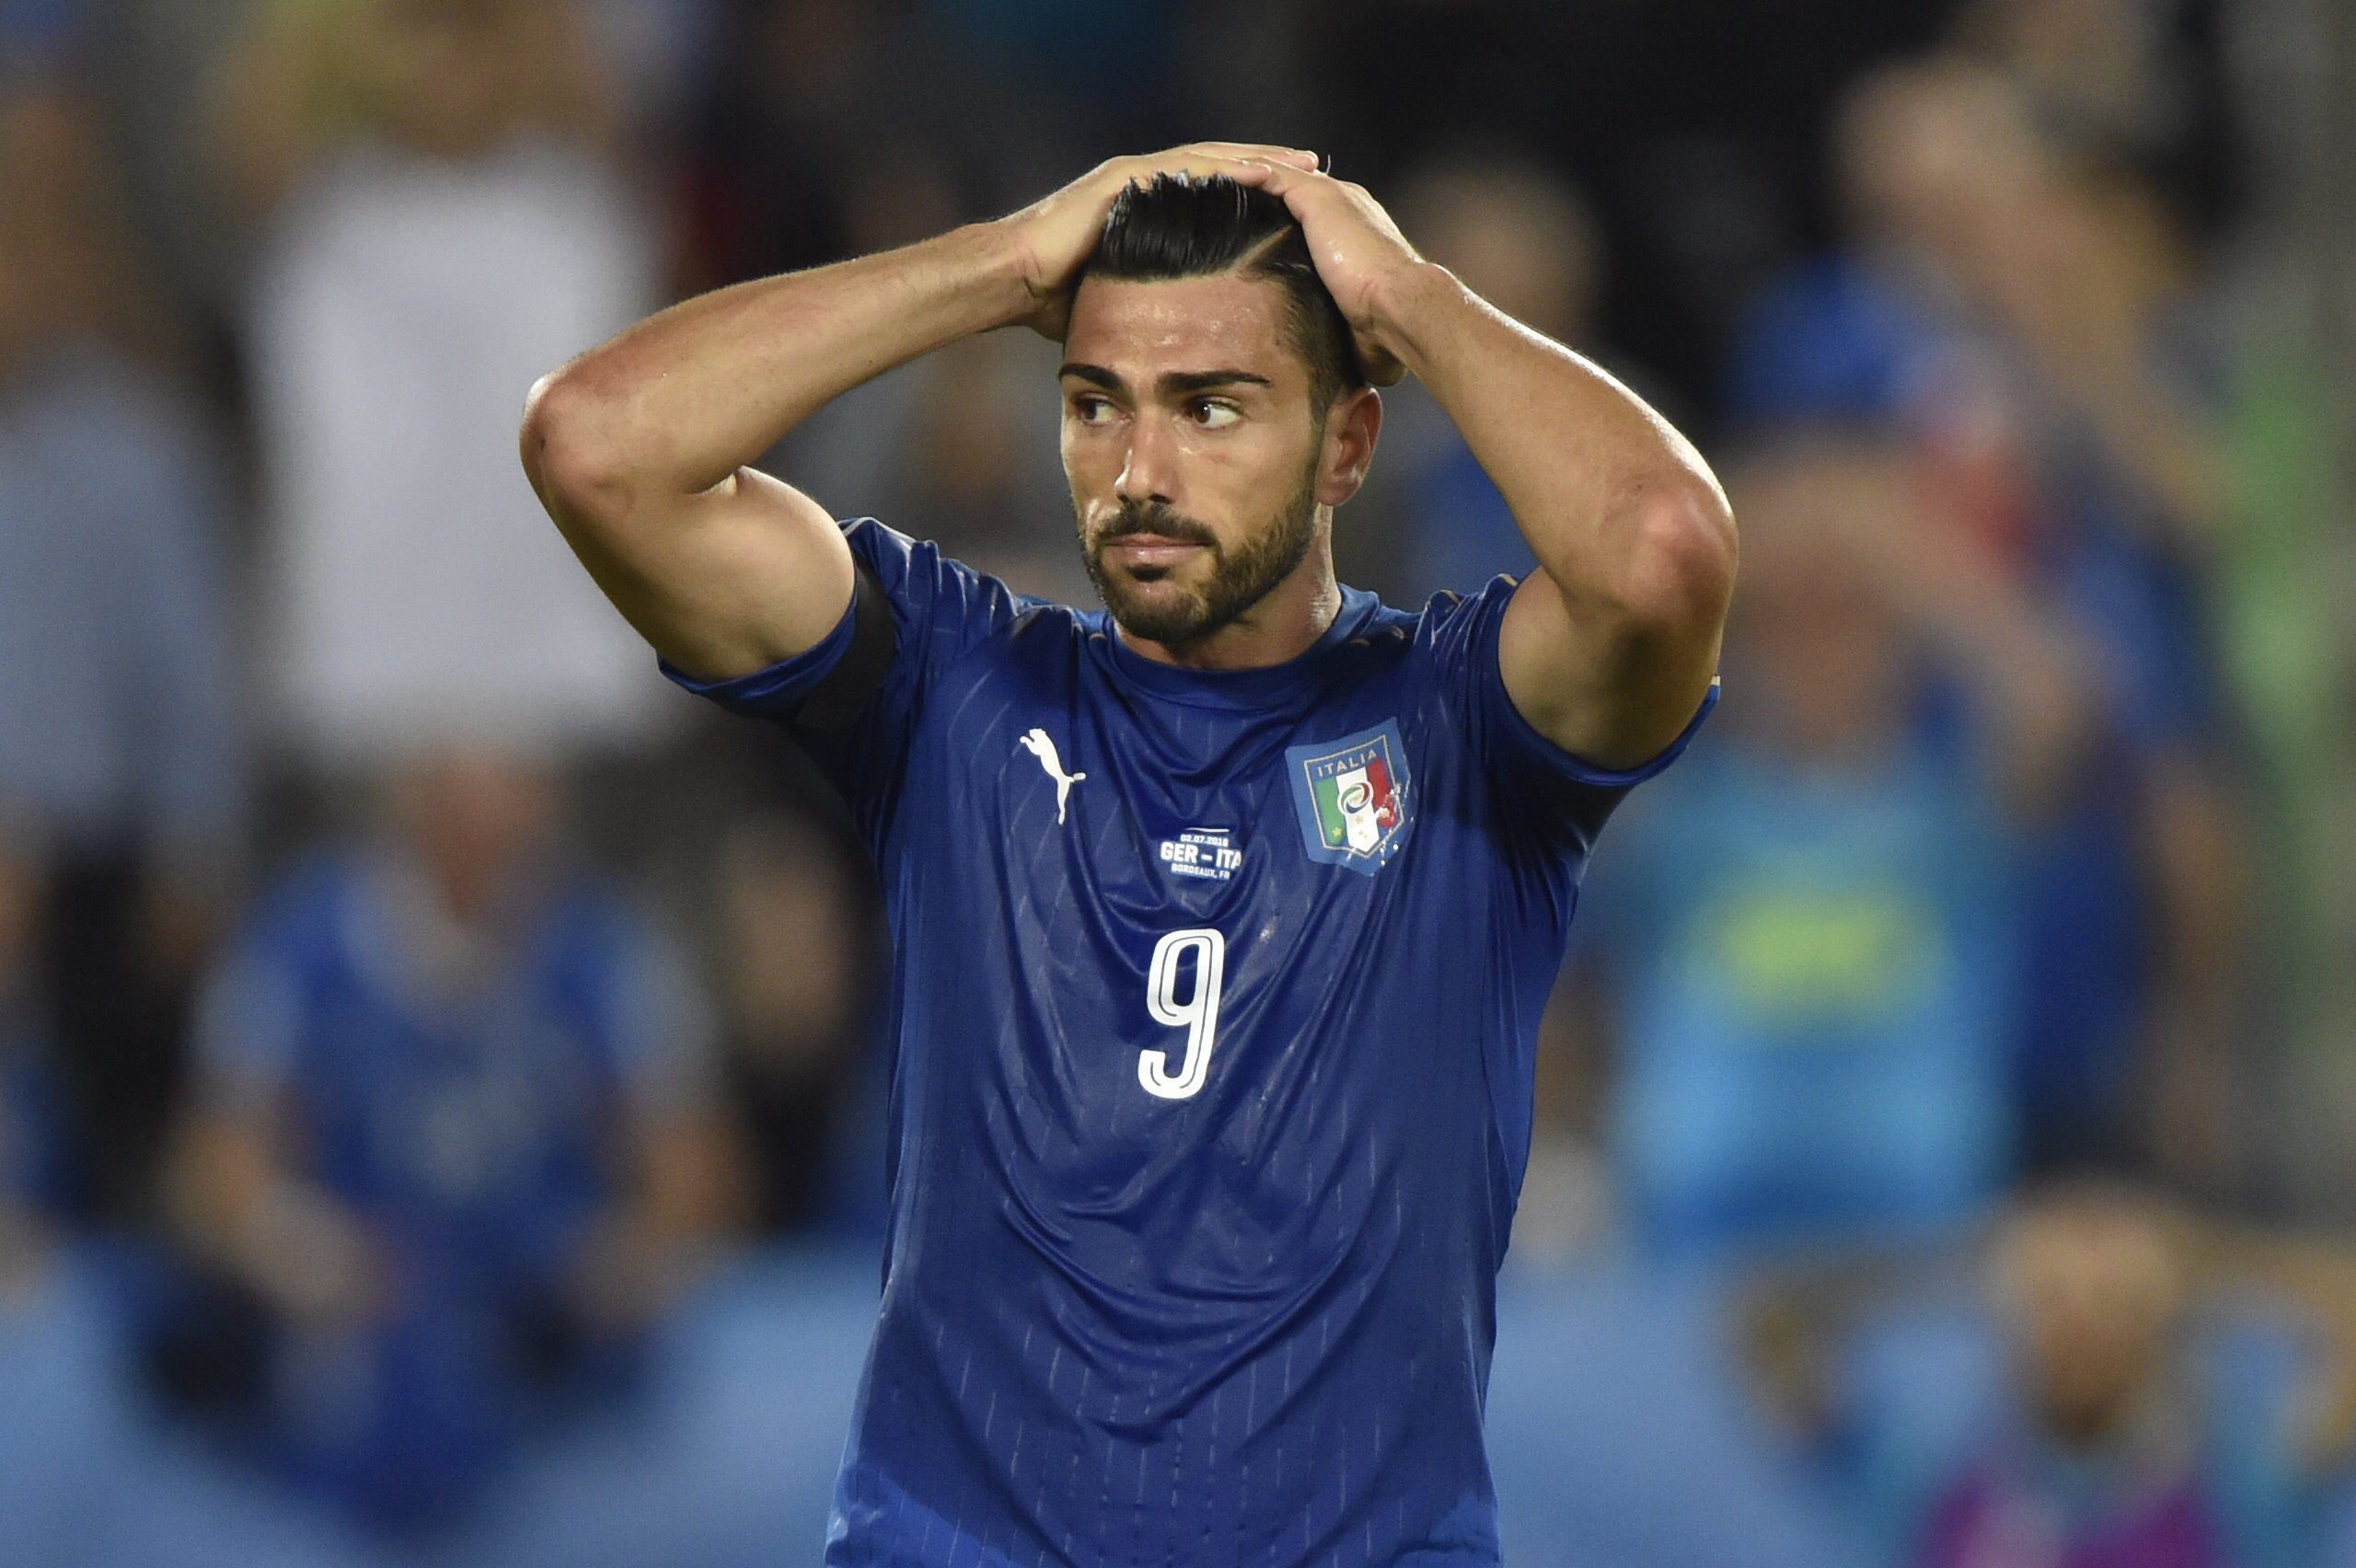 2016-07-02 19:36:30 epa05404535 Graziano Pelle of Italy reacts during the UEFA EURO 2016 quarter final match between Germany and Italy at Stade de Bordeaux in Bordeaux, France, 02 July 2016. (RESTRICTIONS APPLY: For editorial news reporting purposes only. Not used for commercial or marketing purposes without prior written approval of UEFA. Images must appear as still images and must not emulate match action video footage. Photographs published in online publications (whether via the Internet or otherwise) shall have an interval of at least 20 seconds between the posting.) EPA/Tibor Illyes HUNGARY OUT EDITORIAL USE ONLY